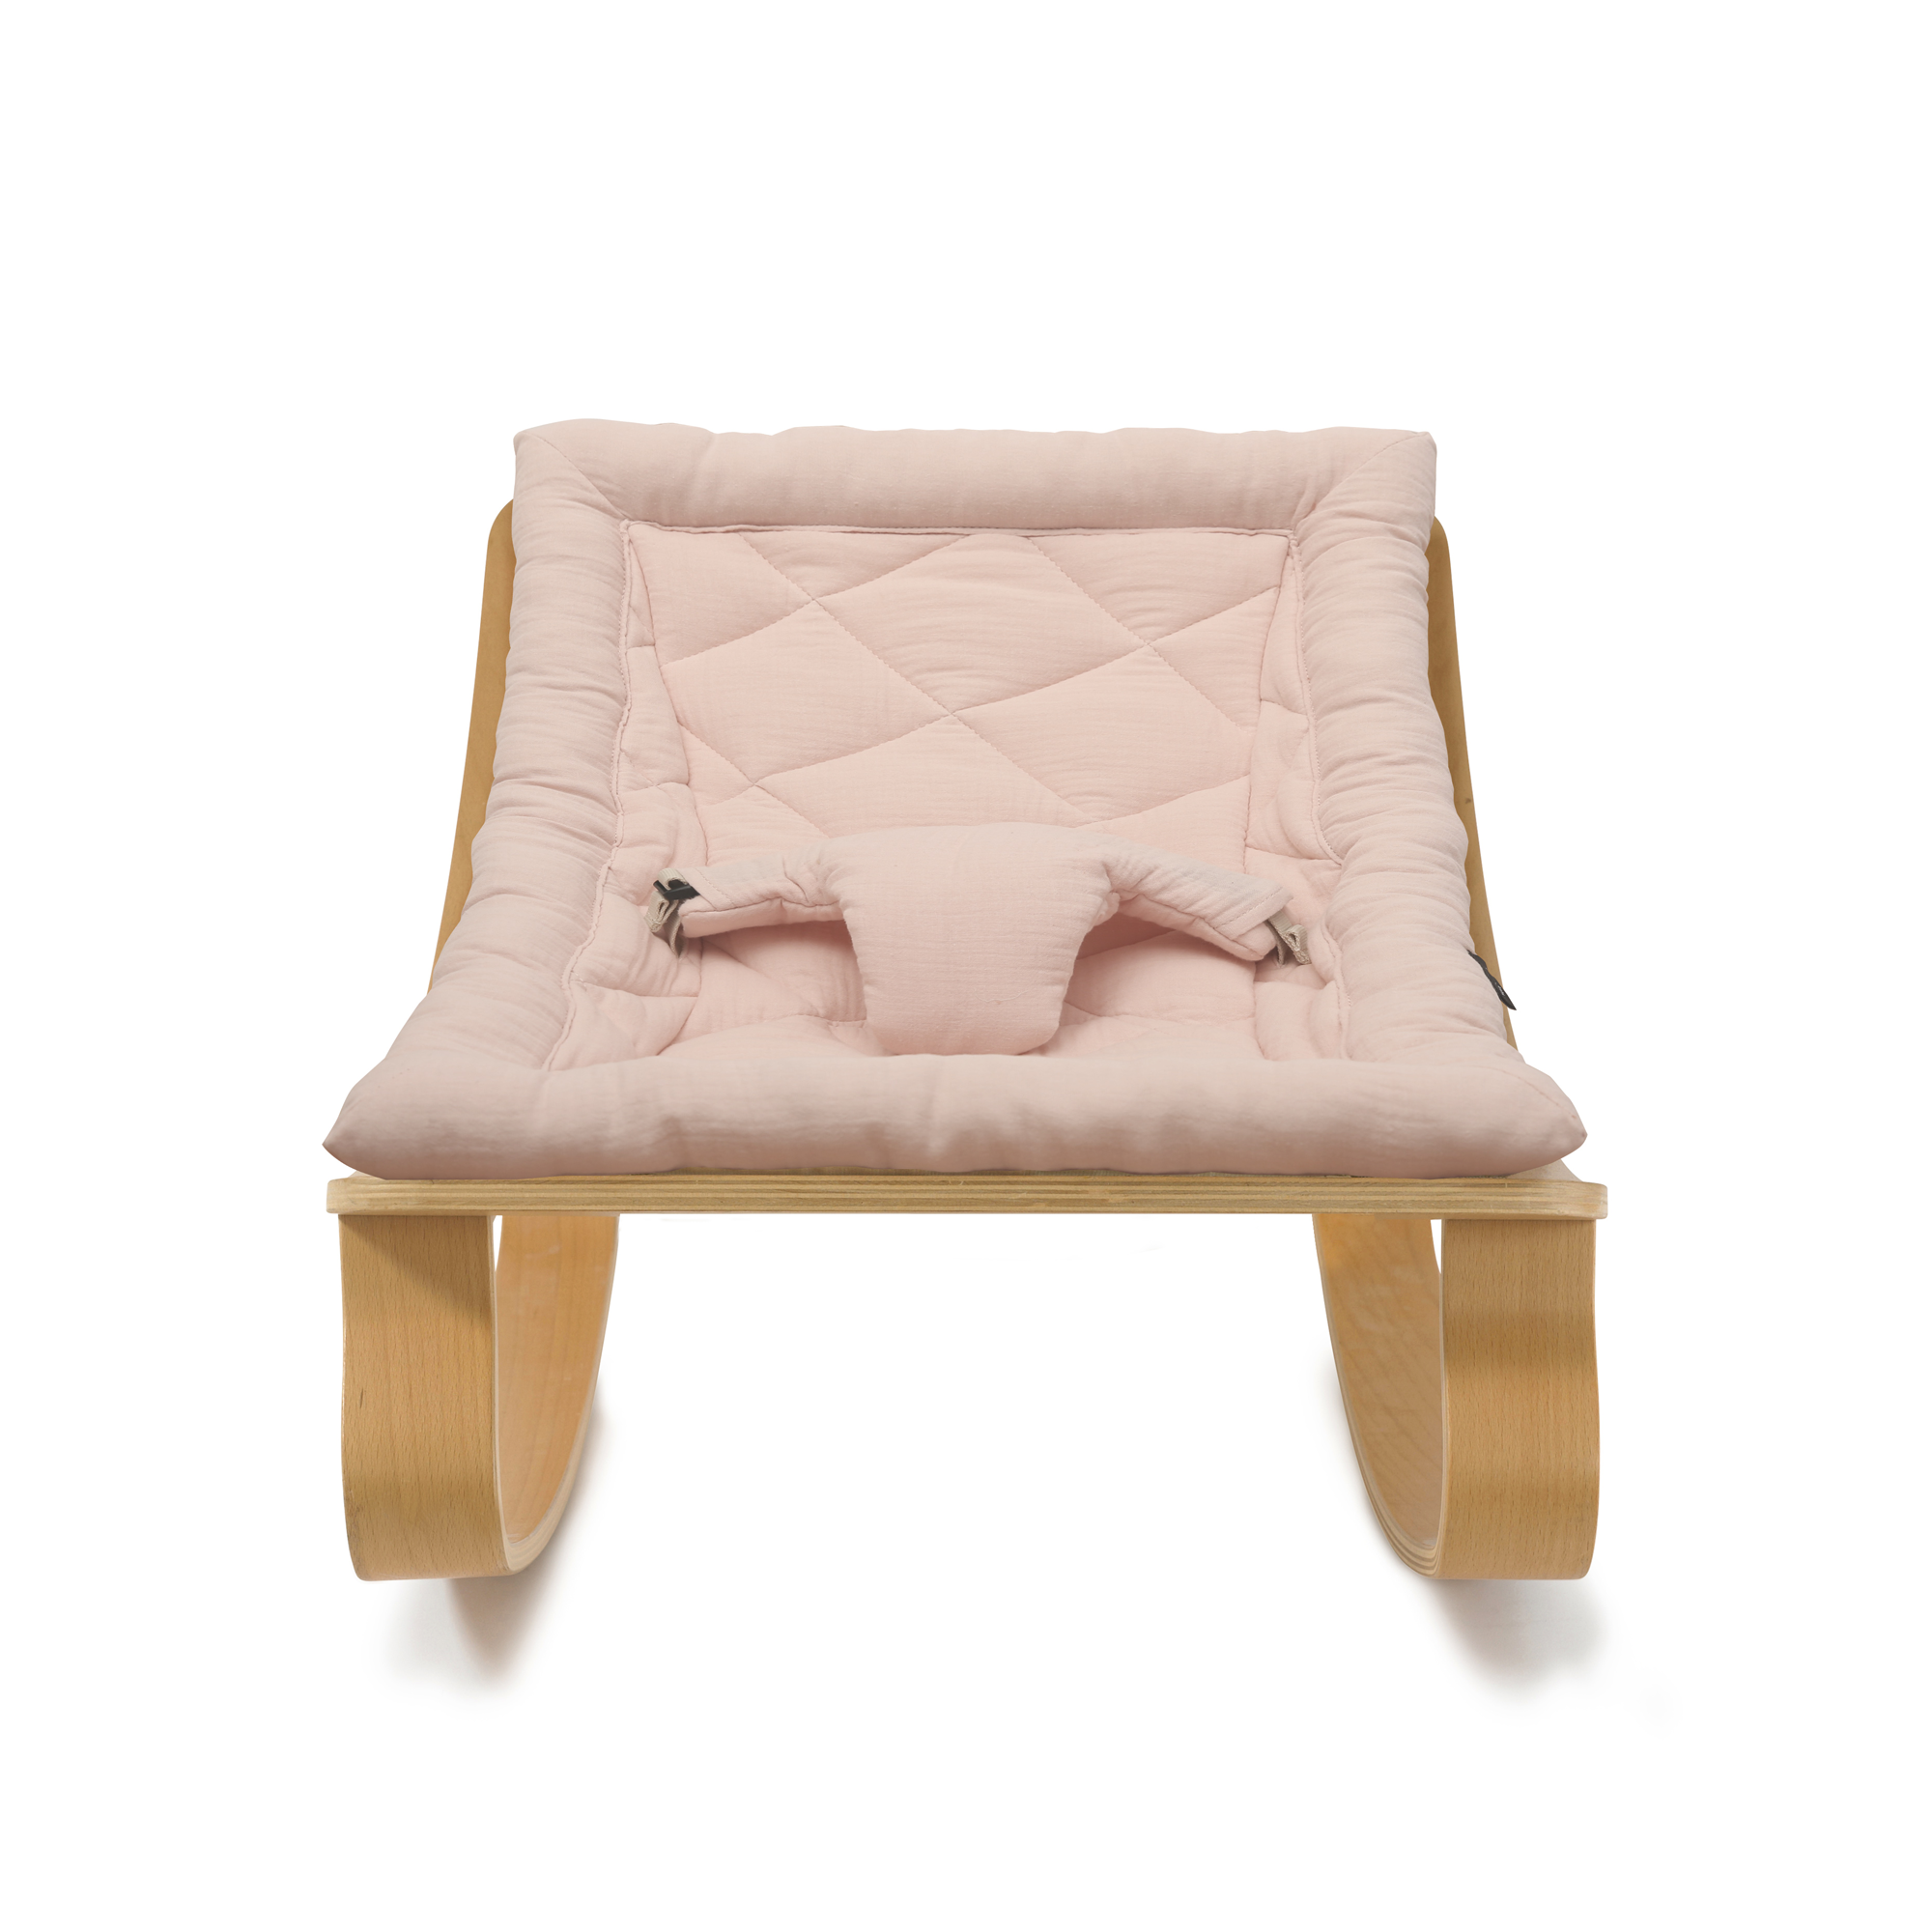 Charlie Crane Baby Rocker LEVO with Organic Nude cushion and Natural wood frame - Little Birdies